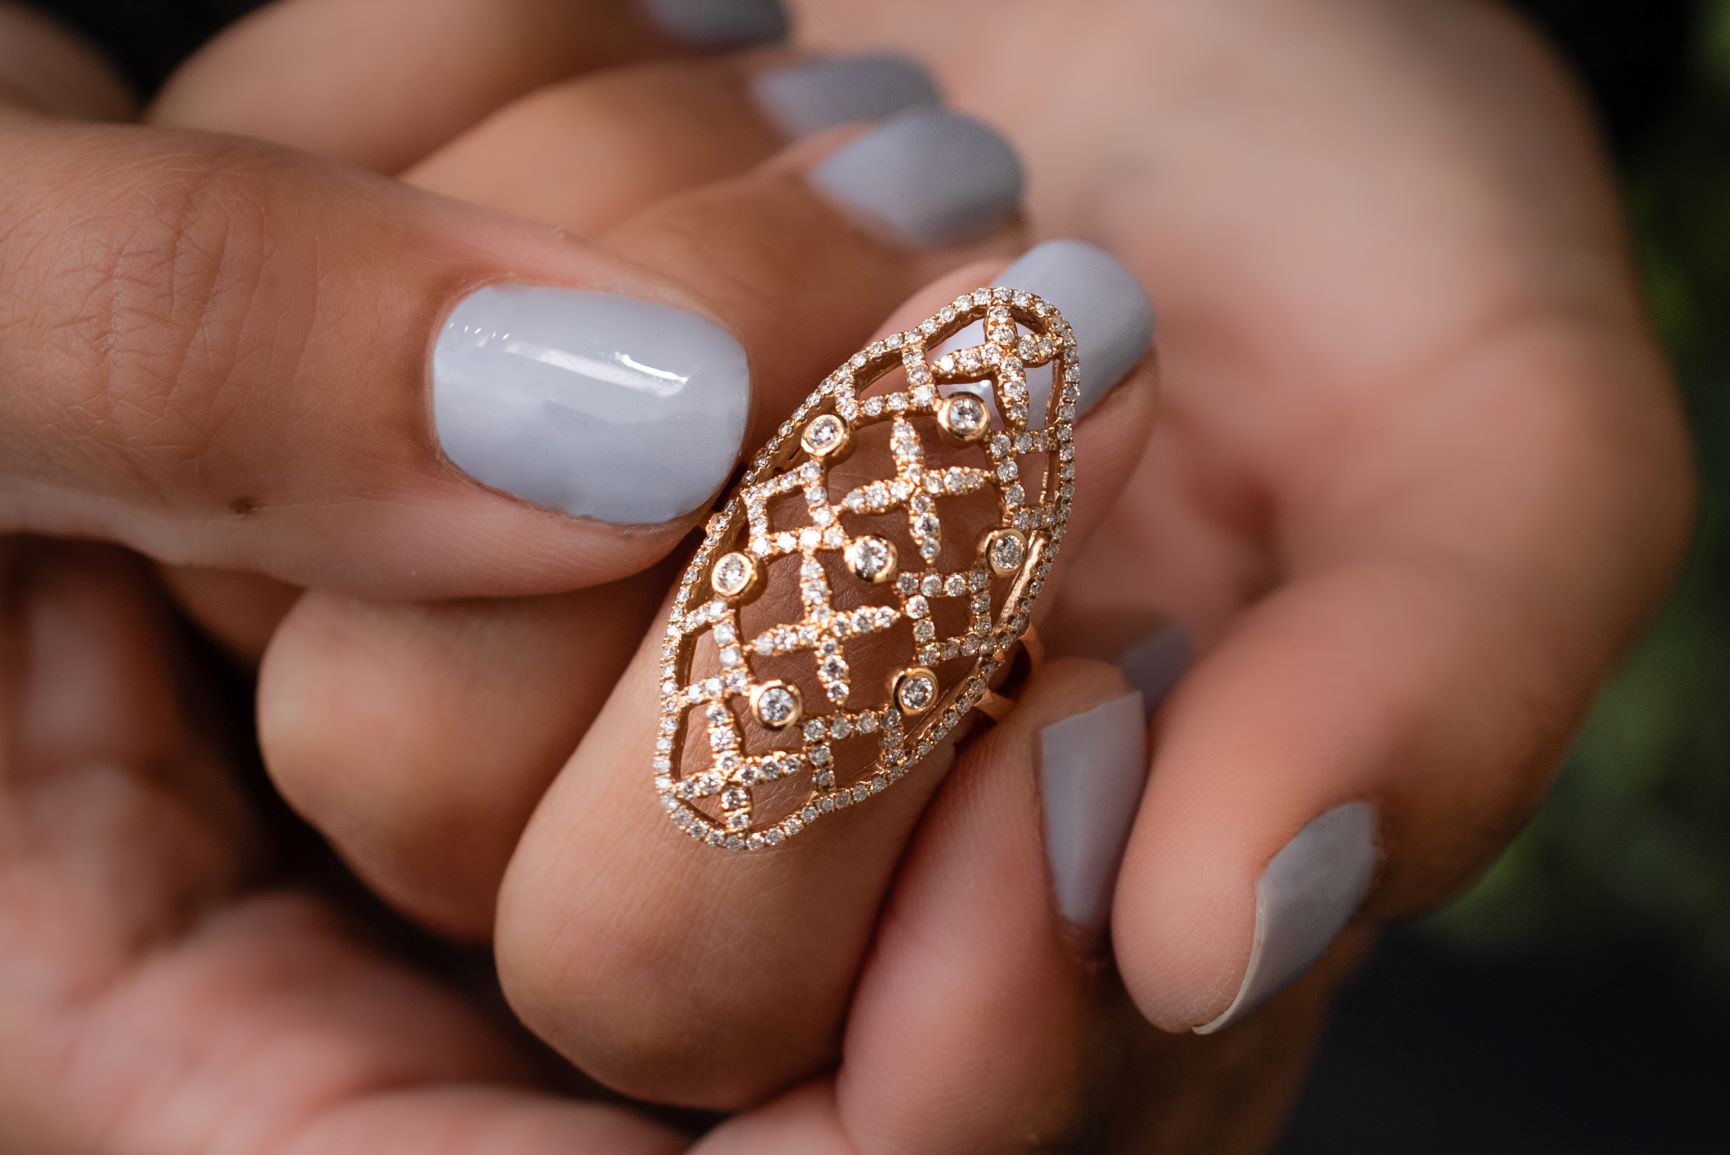 Rose Gold Fancy Lace Style Diamond Ring